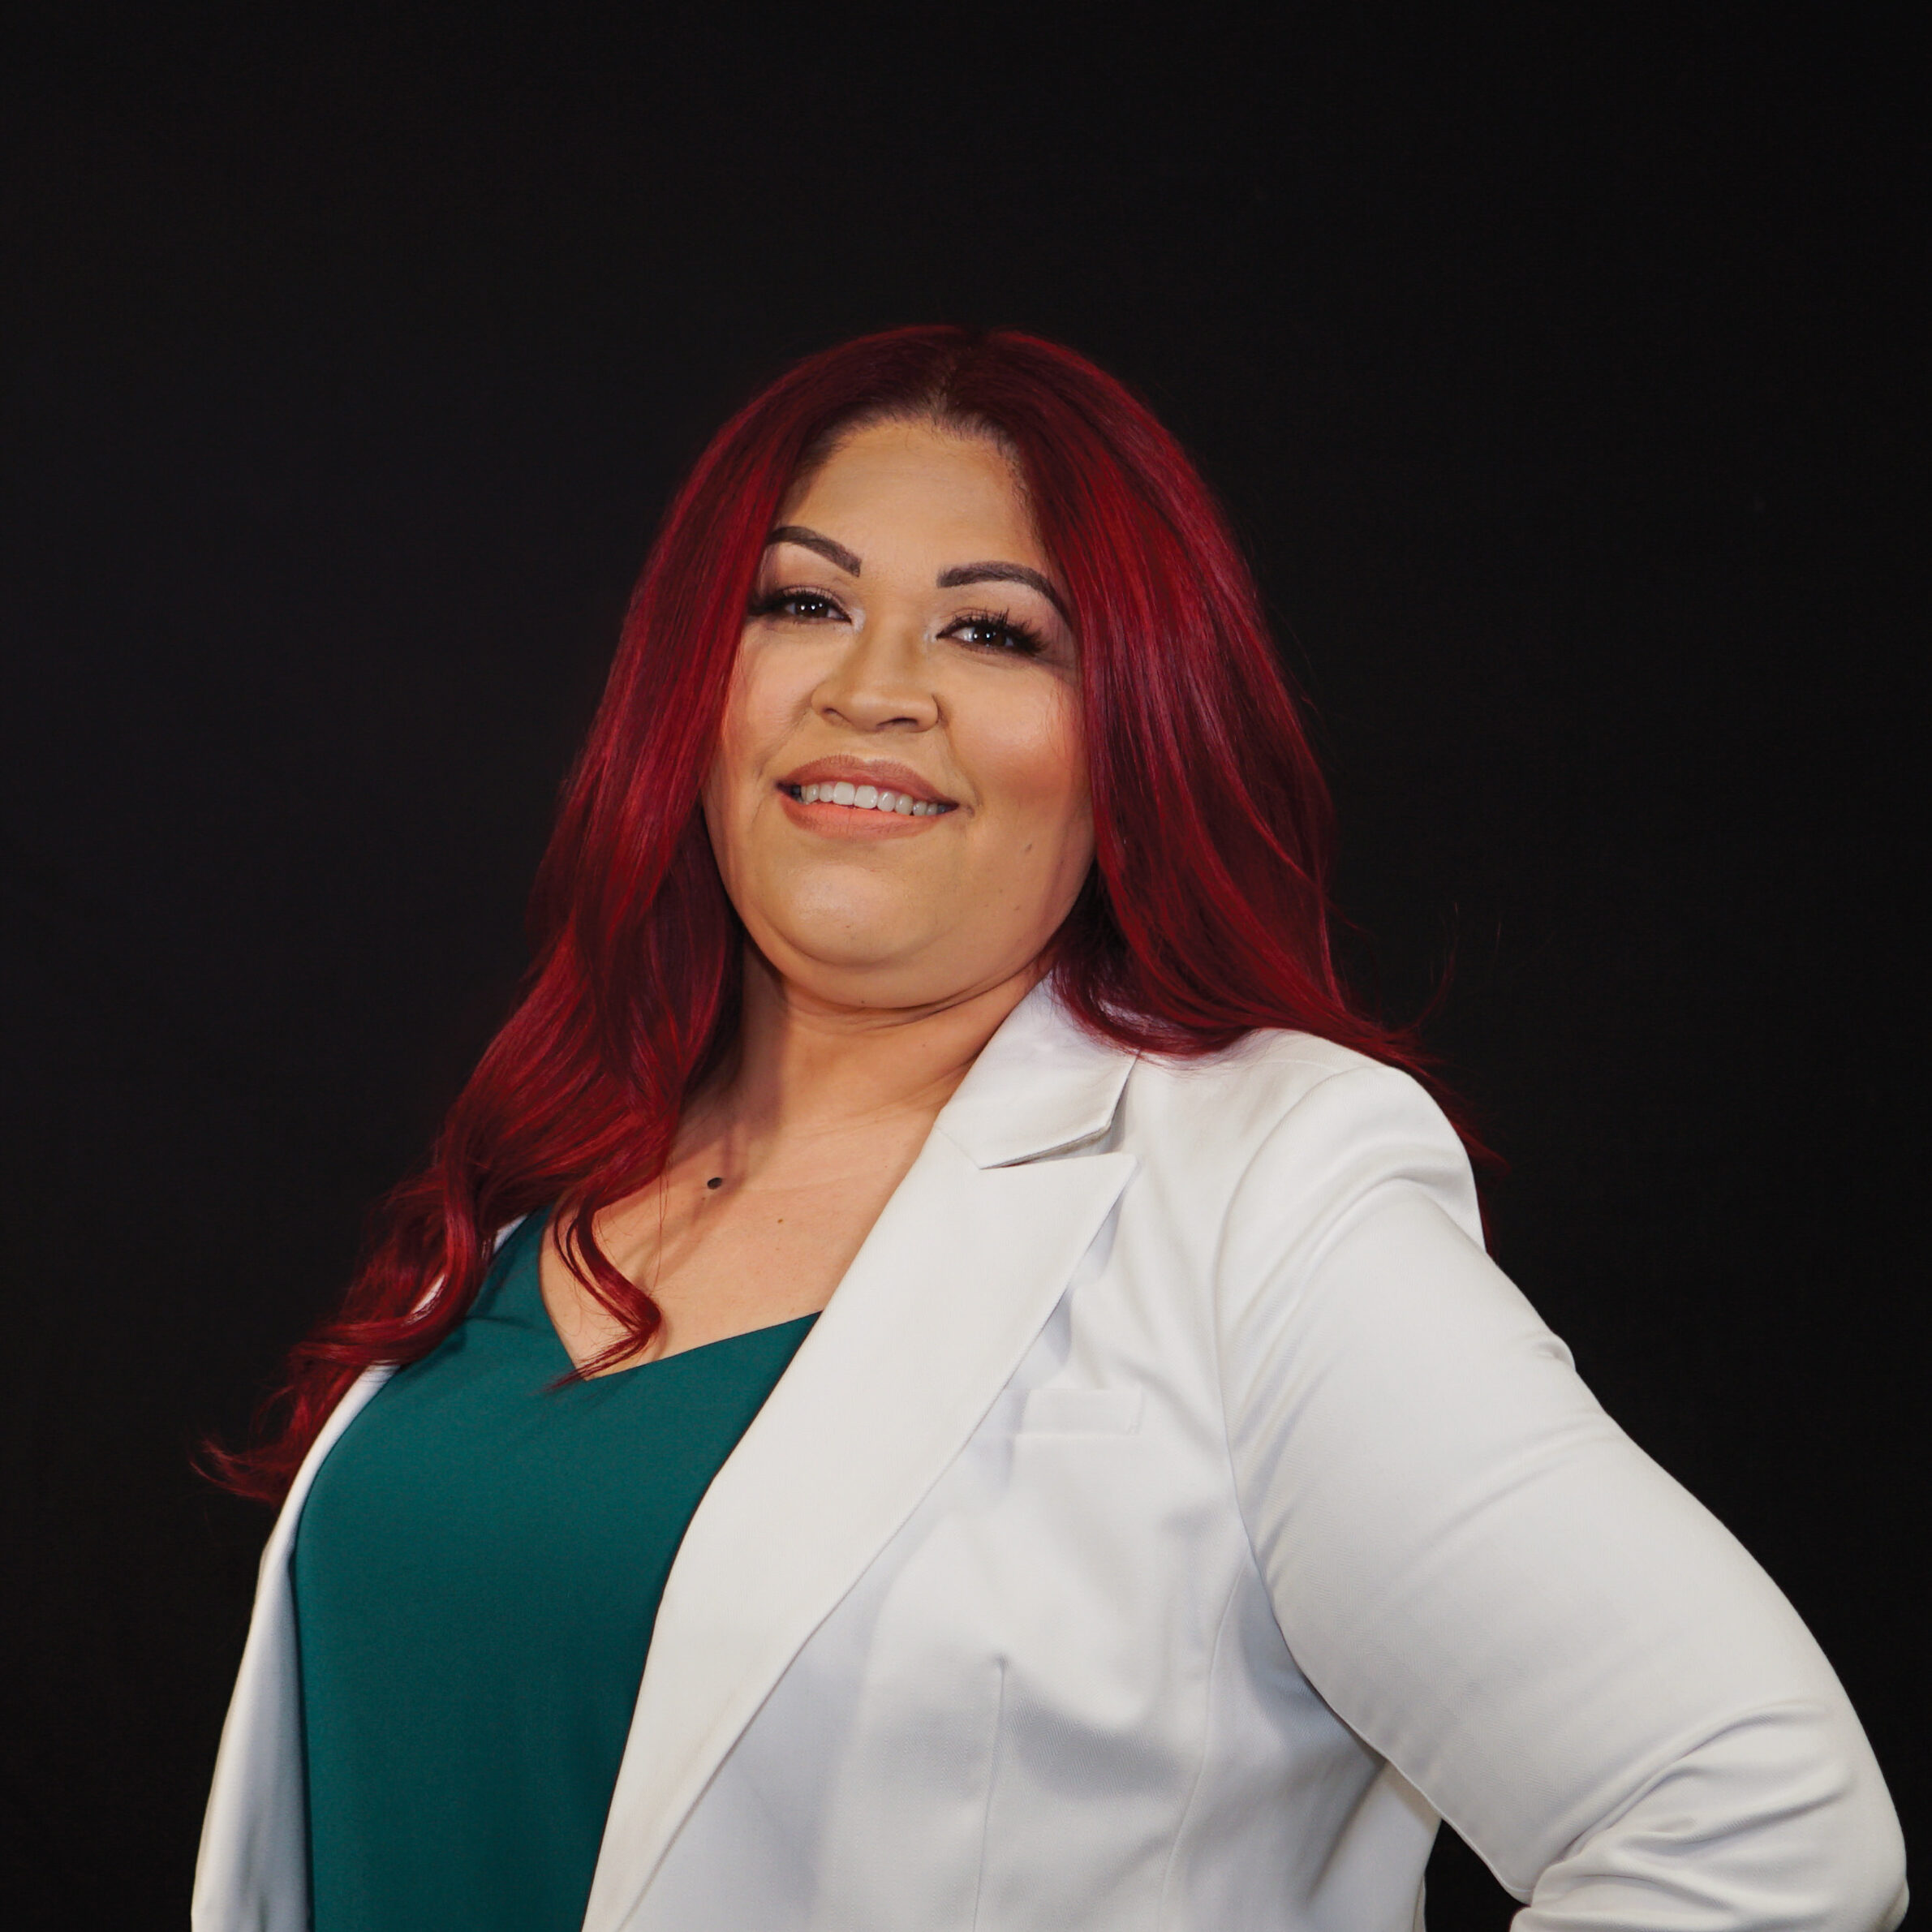 Headshot of Anna Hernandez against a black background. She has long, red hair and is wearing a green top under a white jacket. 